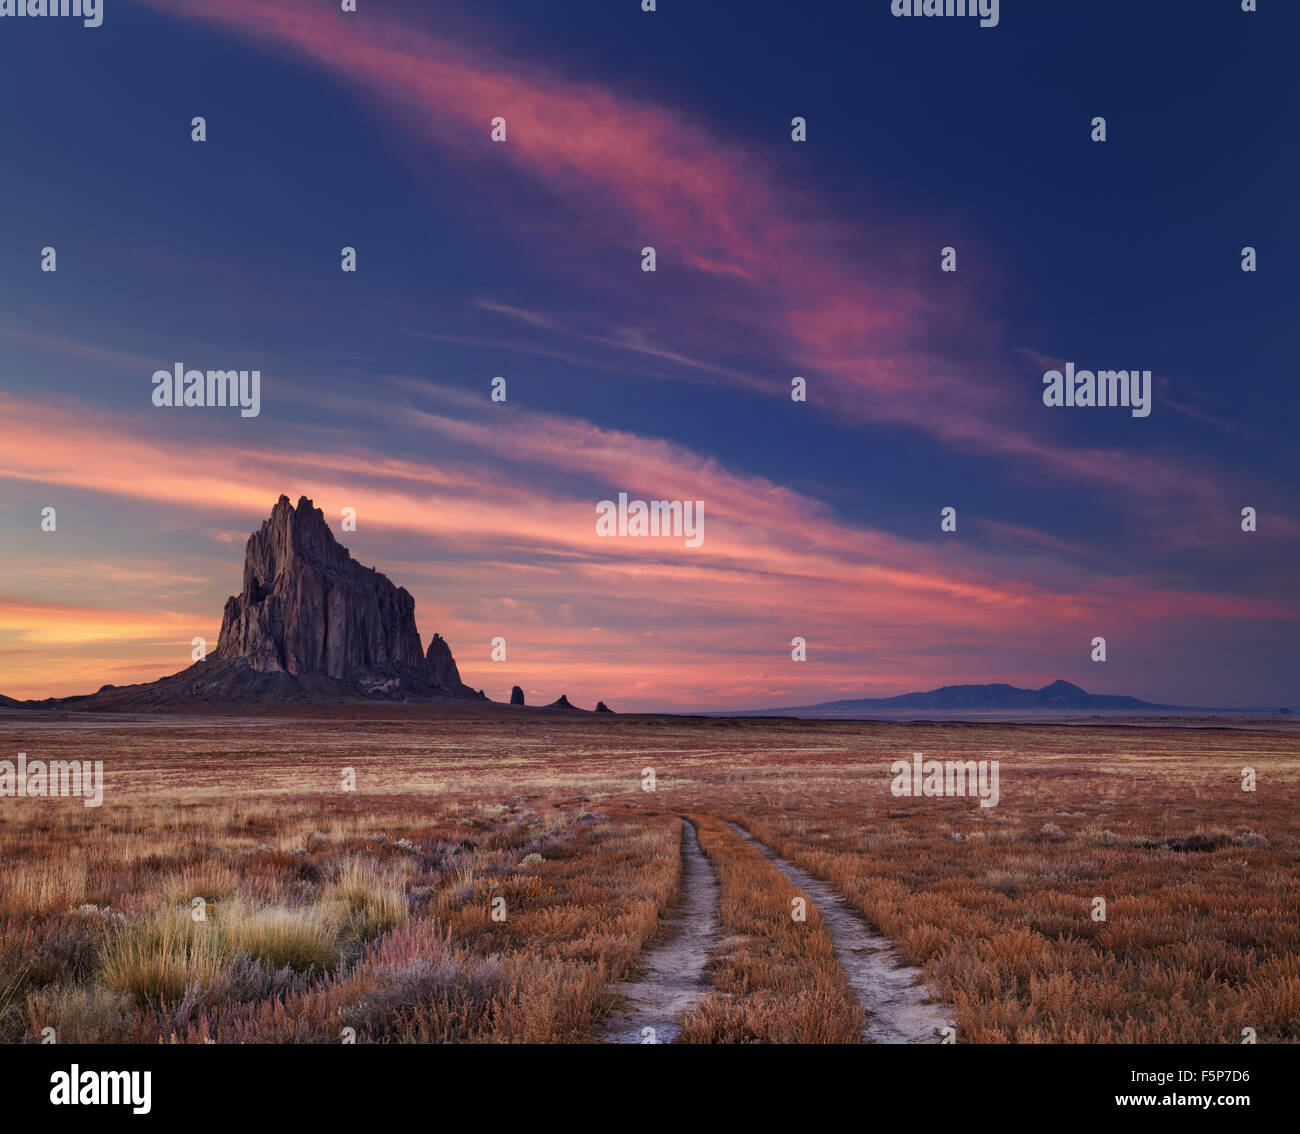 Shiprock, the great volcanic rock mountain in desert plane of New Mexico, USA Stock Photo